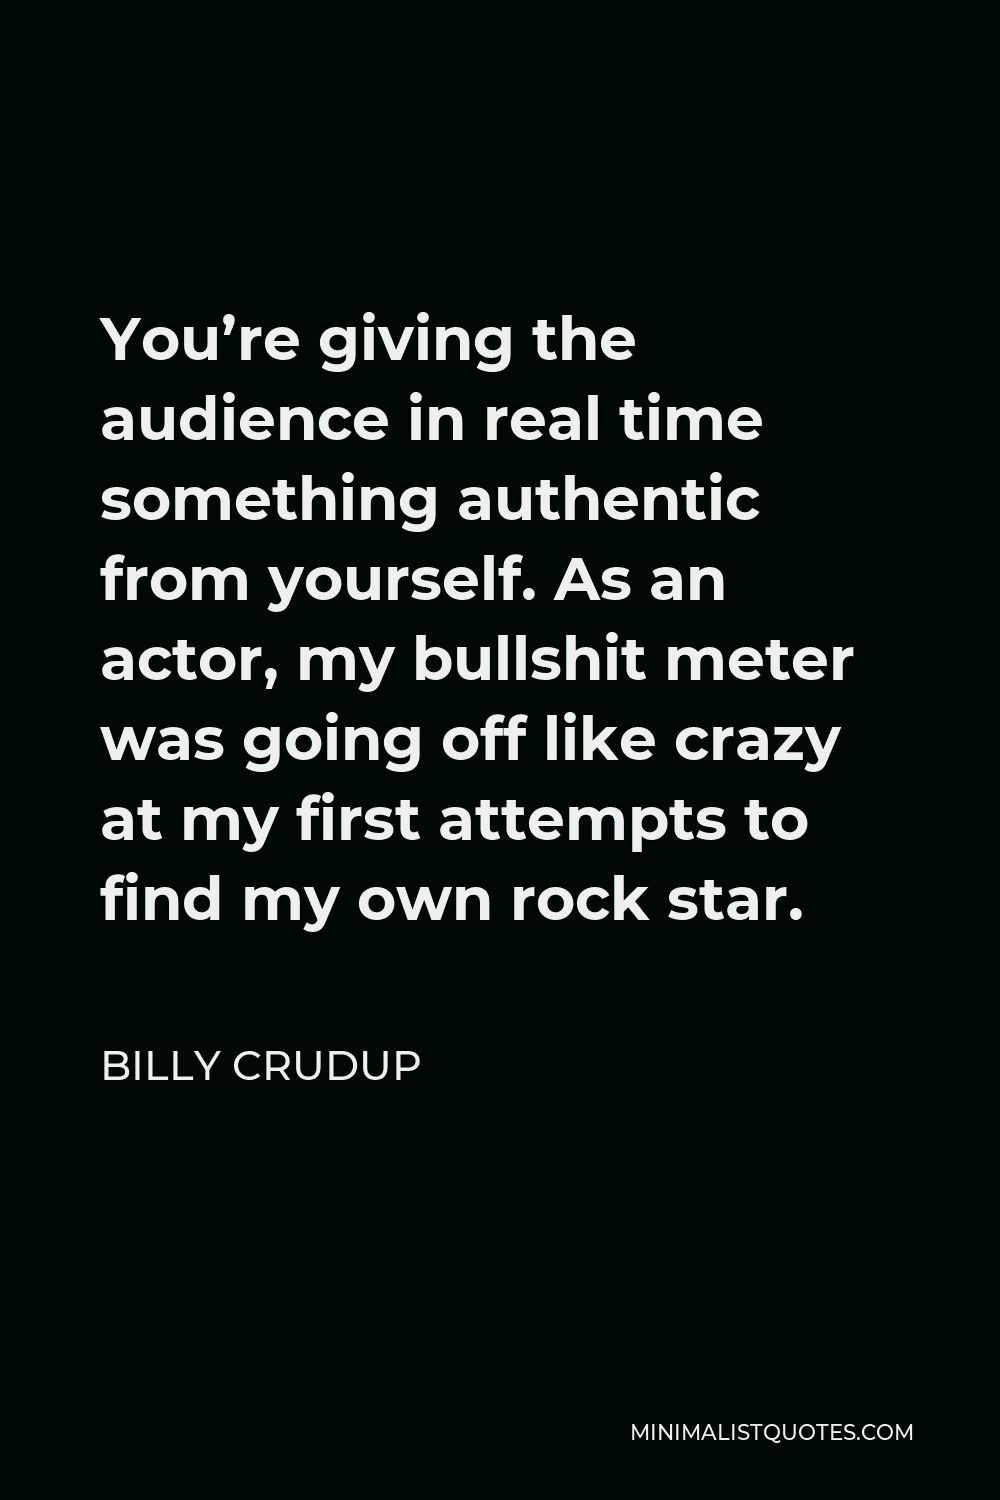 Billy Crudup Quote - You’re giving the audience in real time something authentic from yourself. As an actor, my bullshit meter was going off like crazy at my first attempts to find my own rock star.